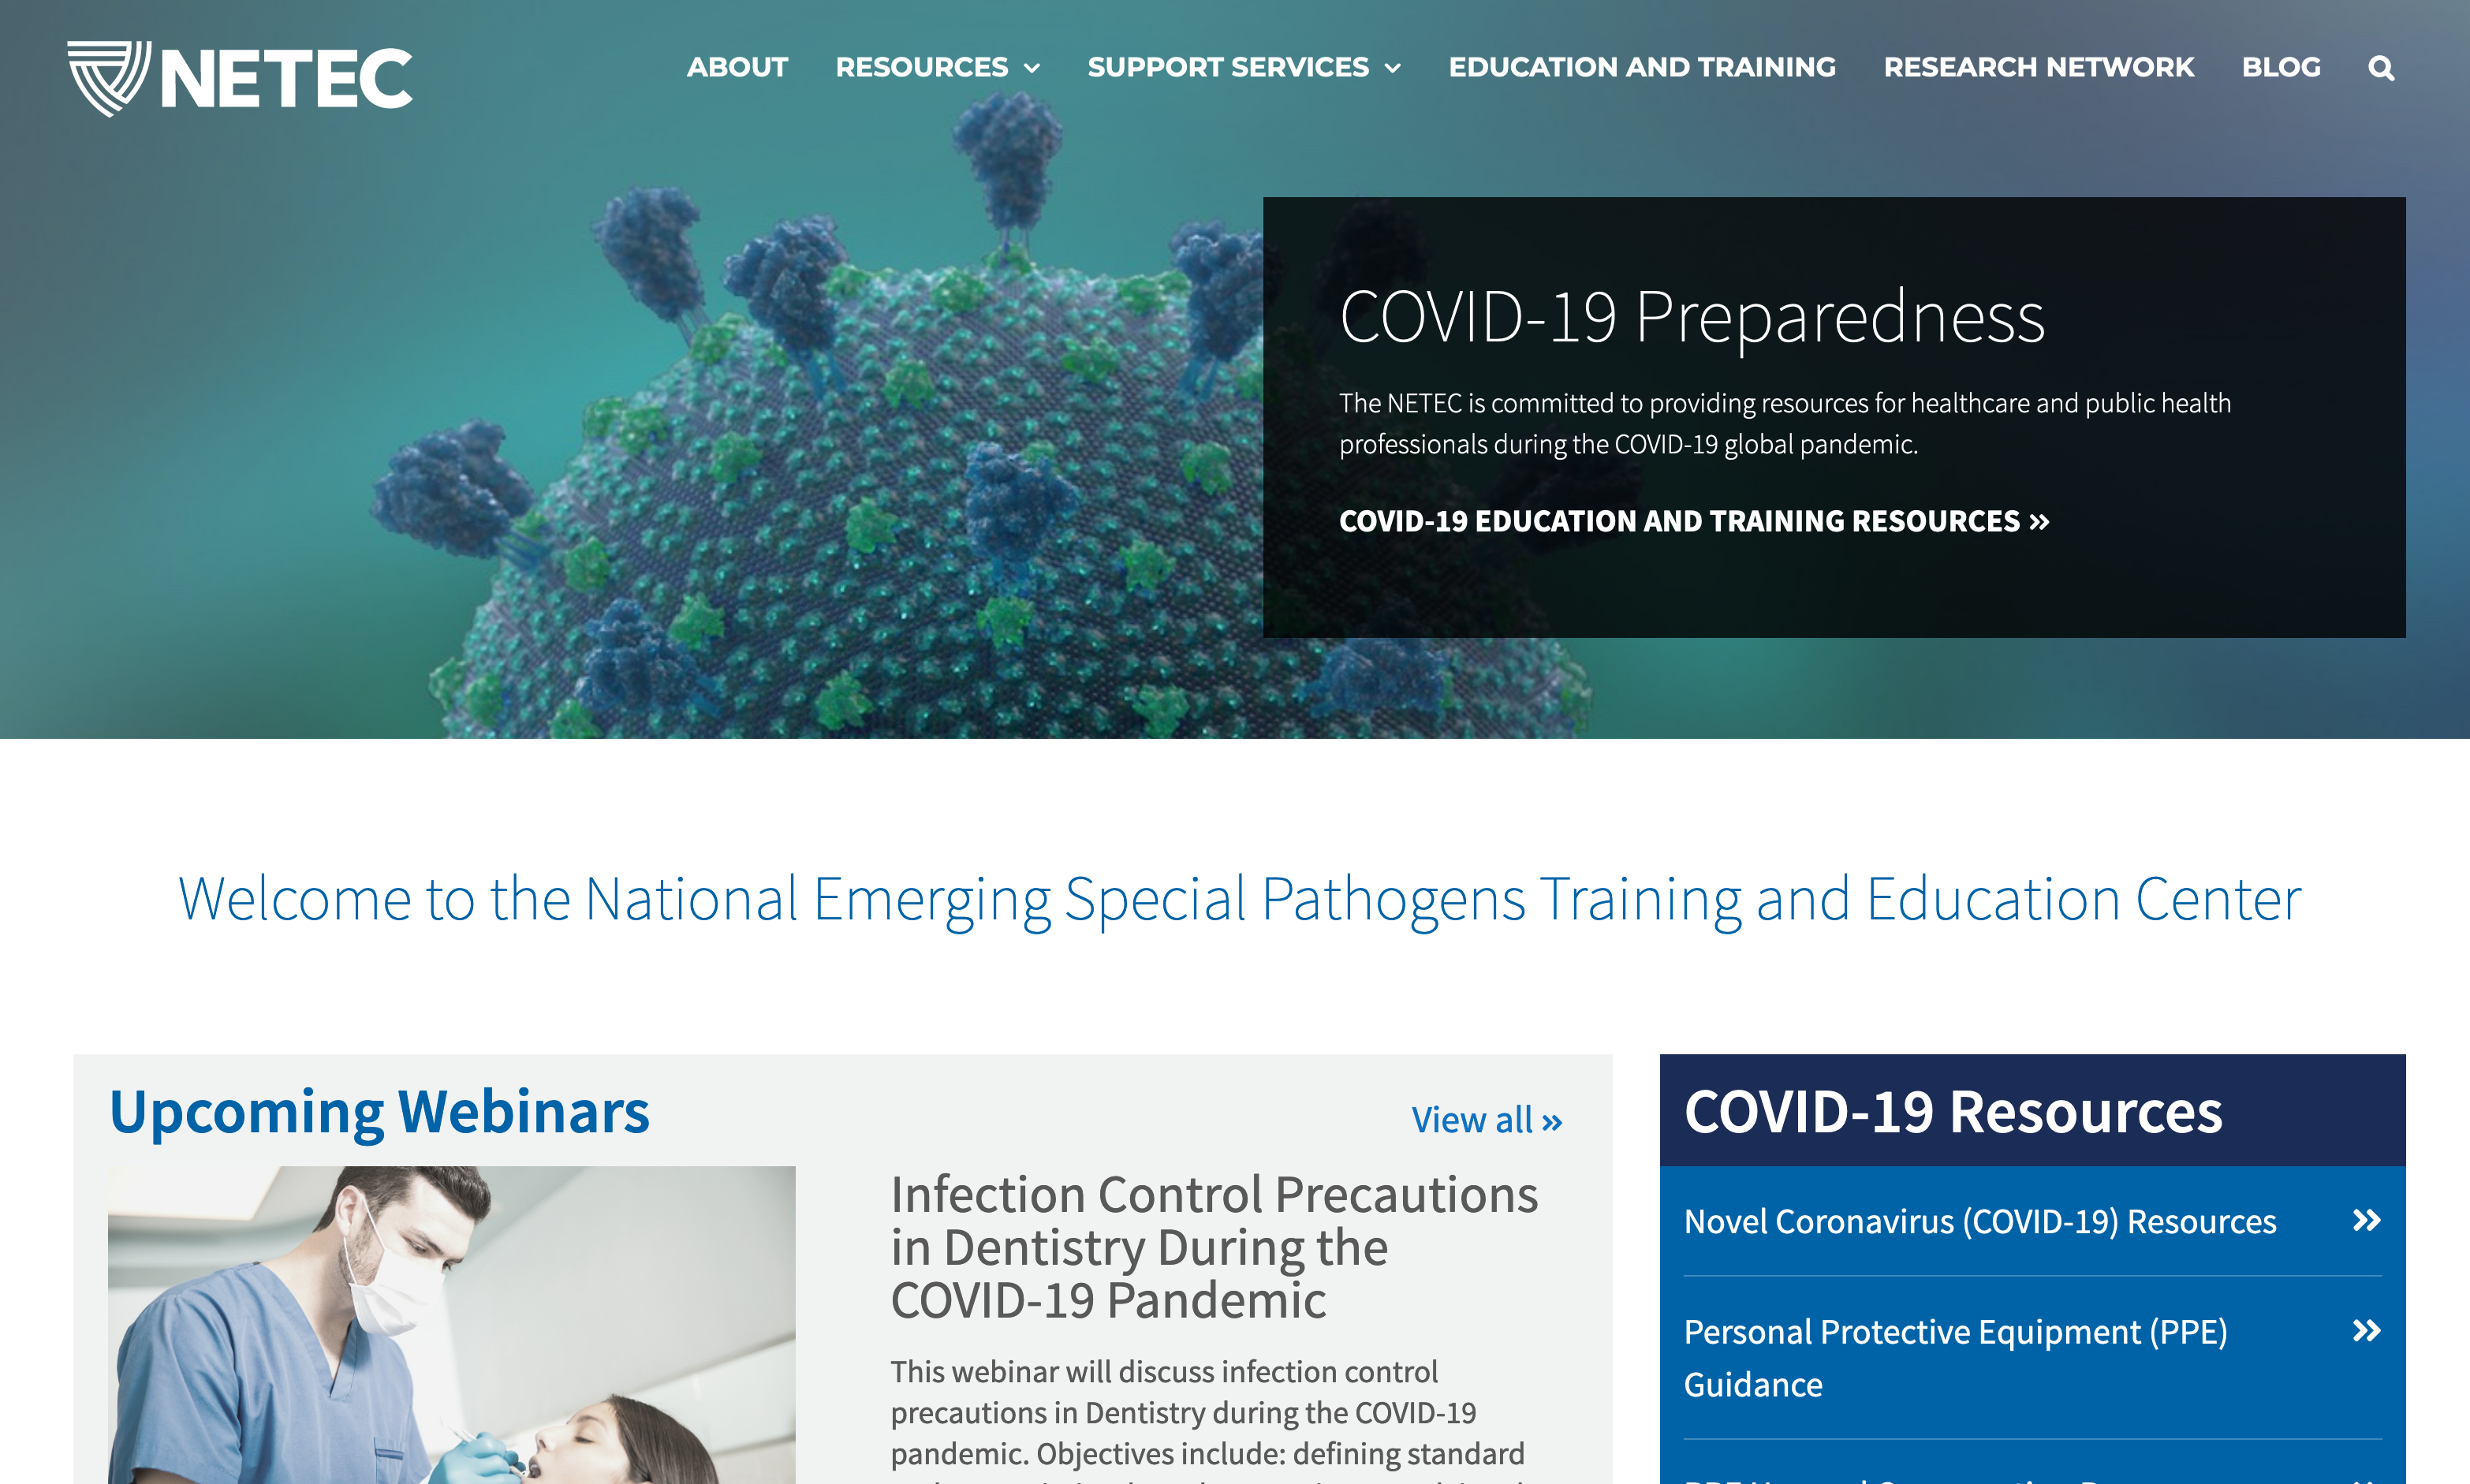 image of the NETEC website with COVID-19 Preparedness title